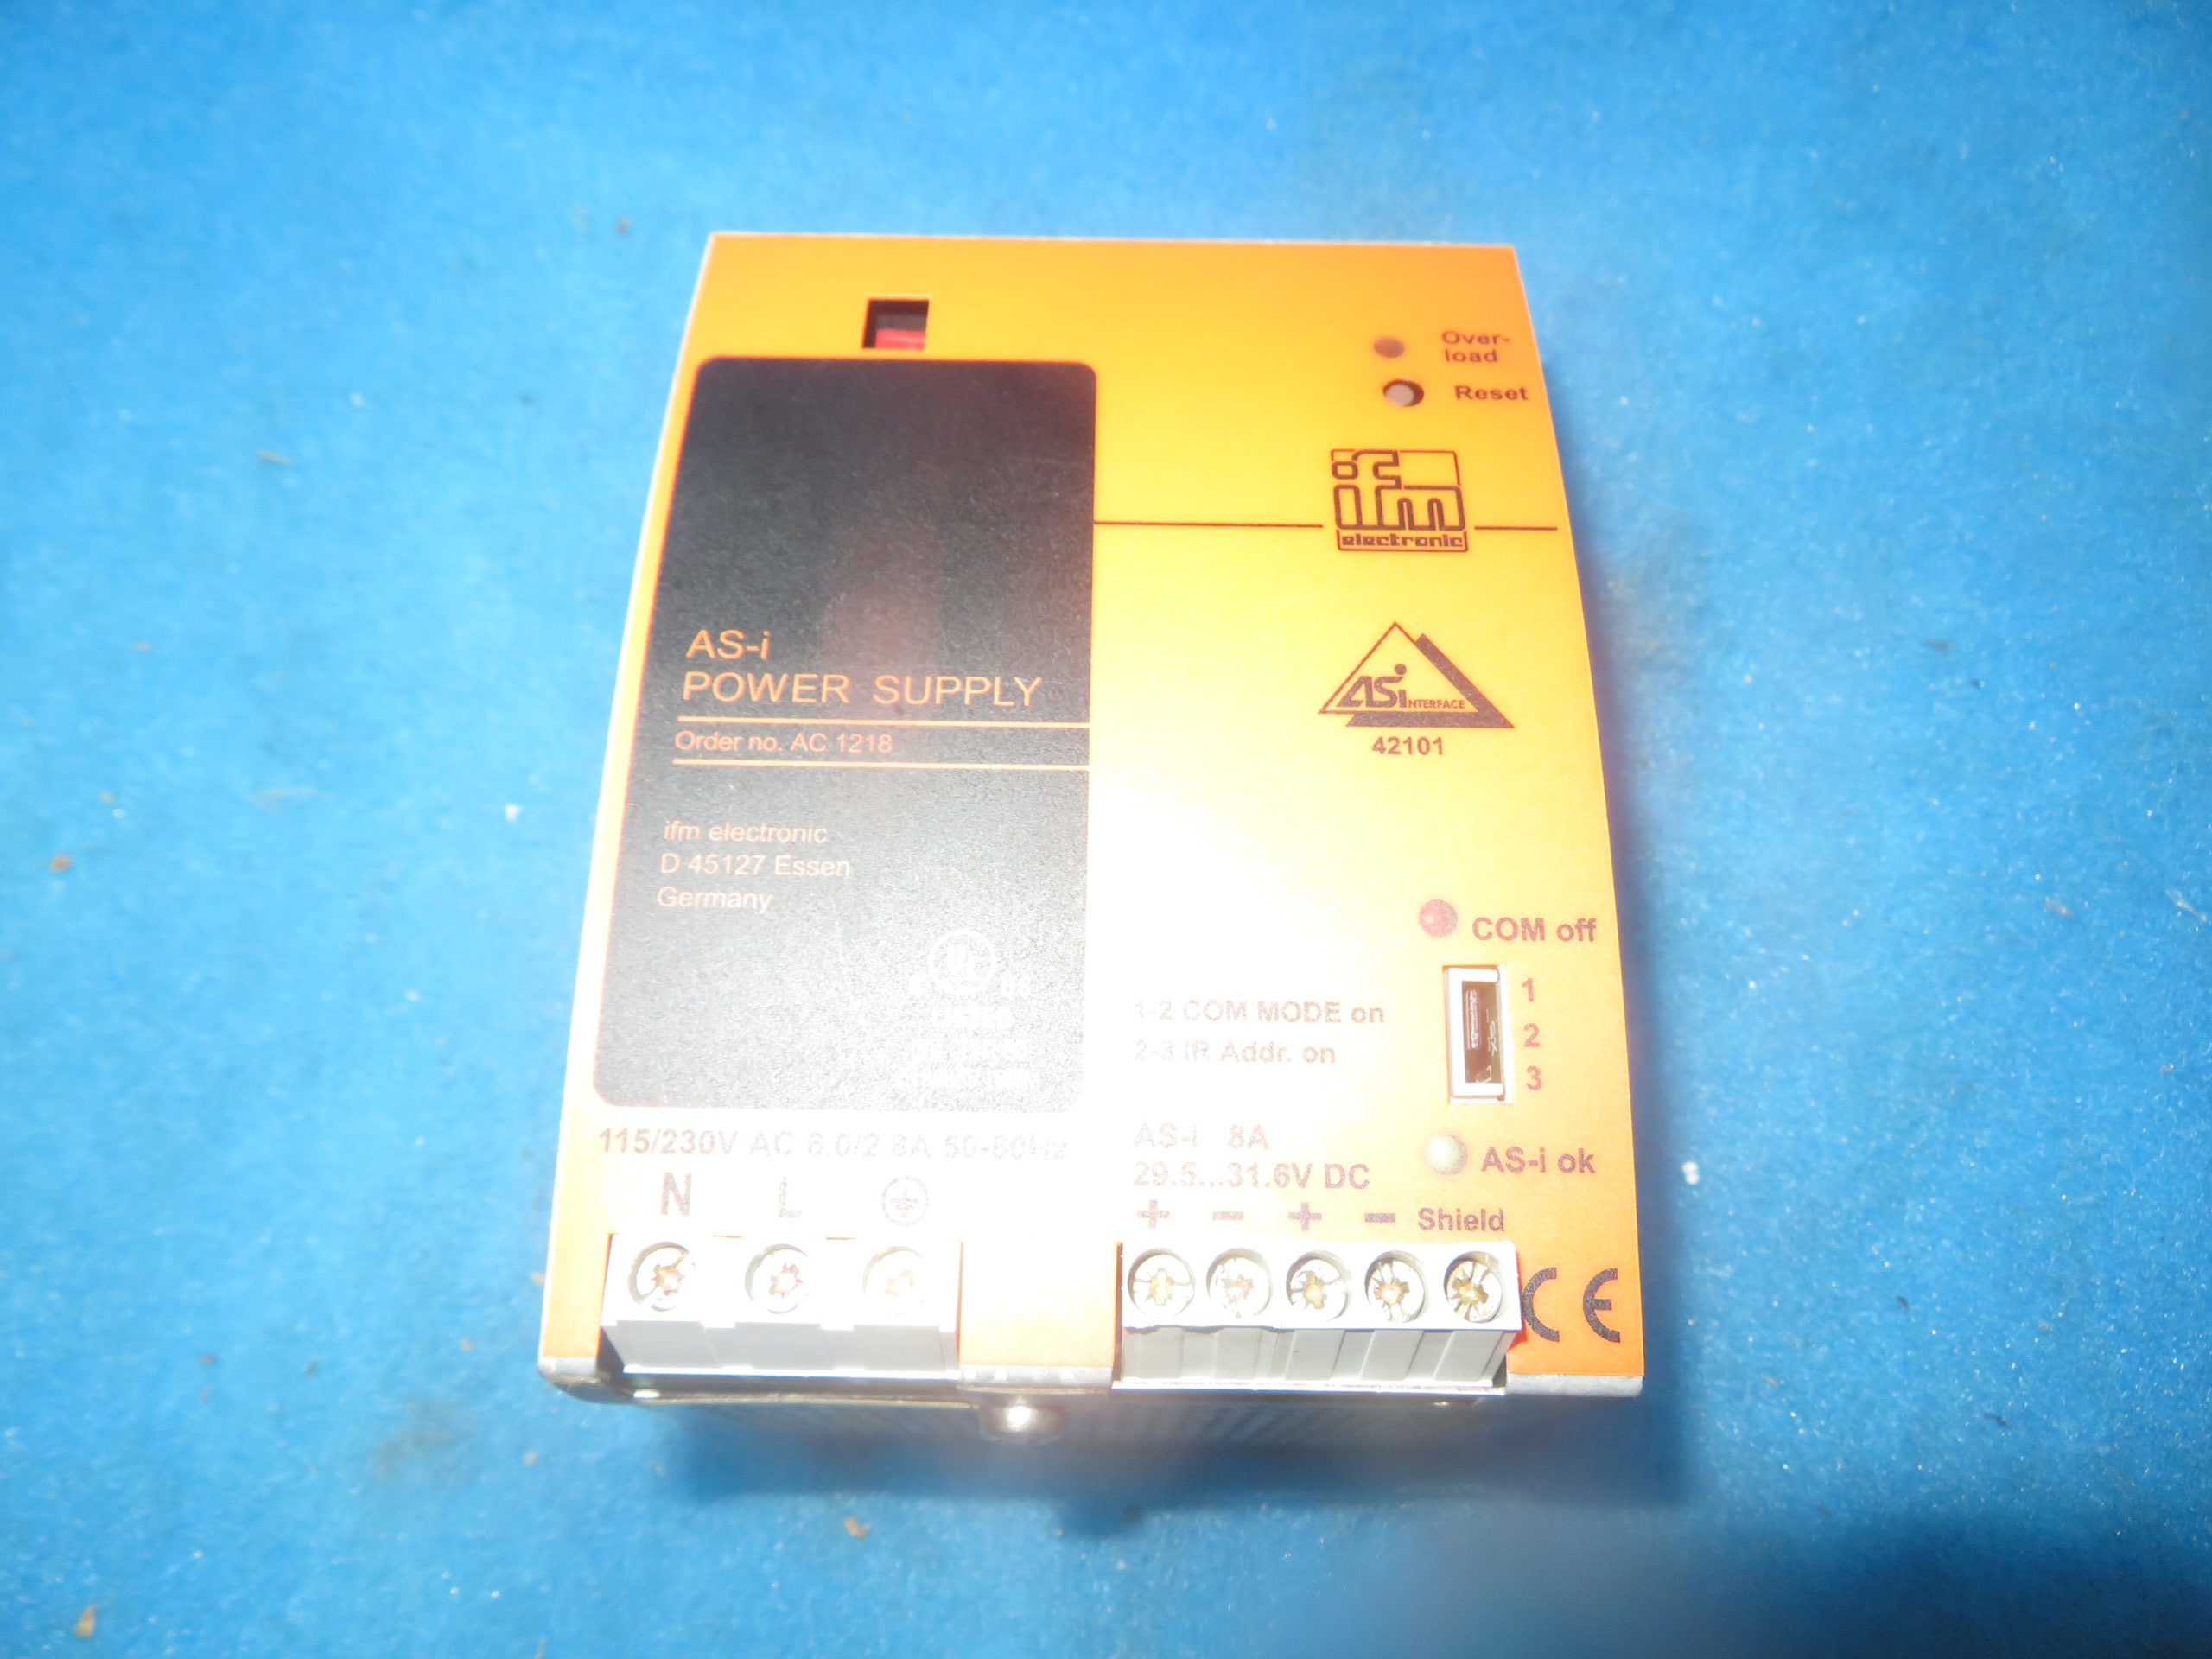 AS-i AC-1218 Power Supply IFM Electronic 